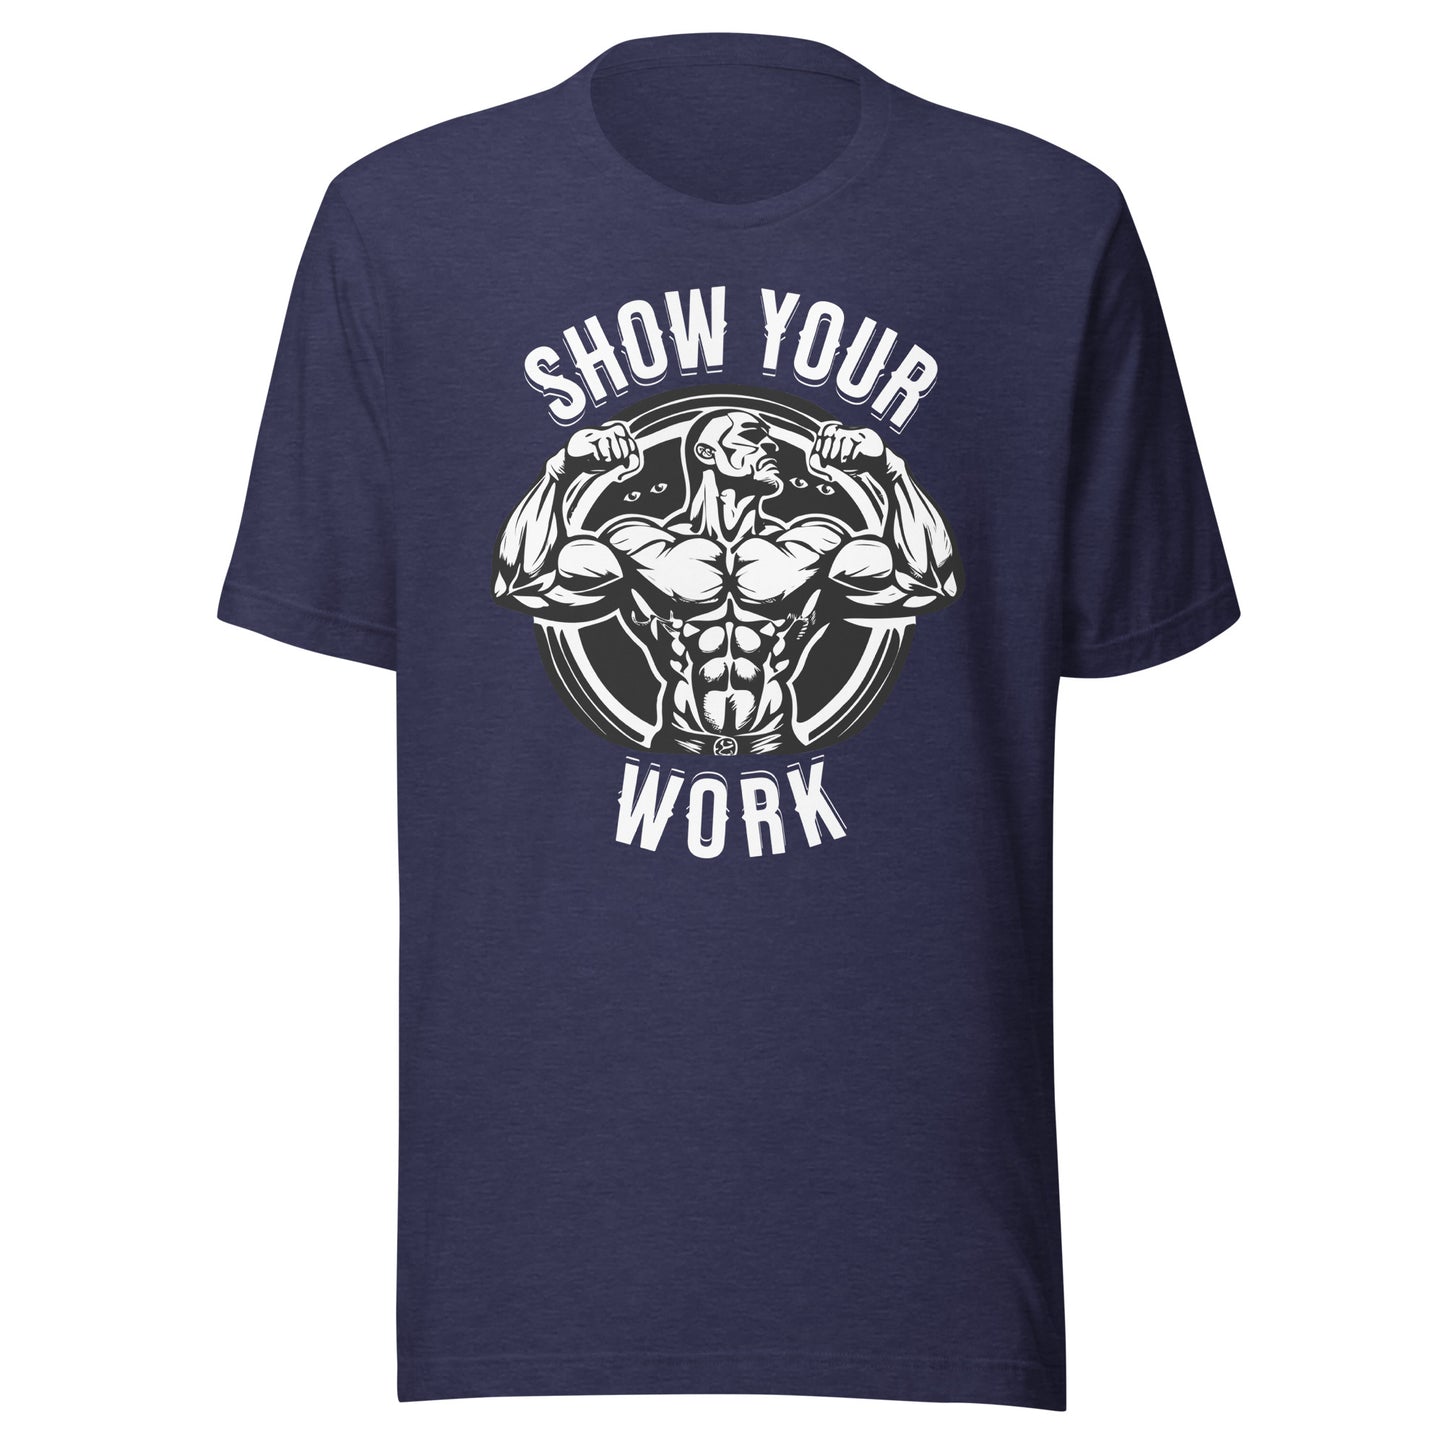 Show Your Work Unisex t-shirt